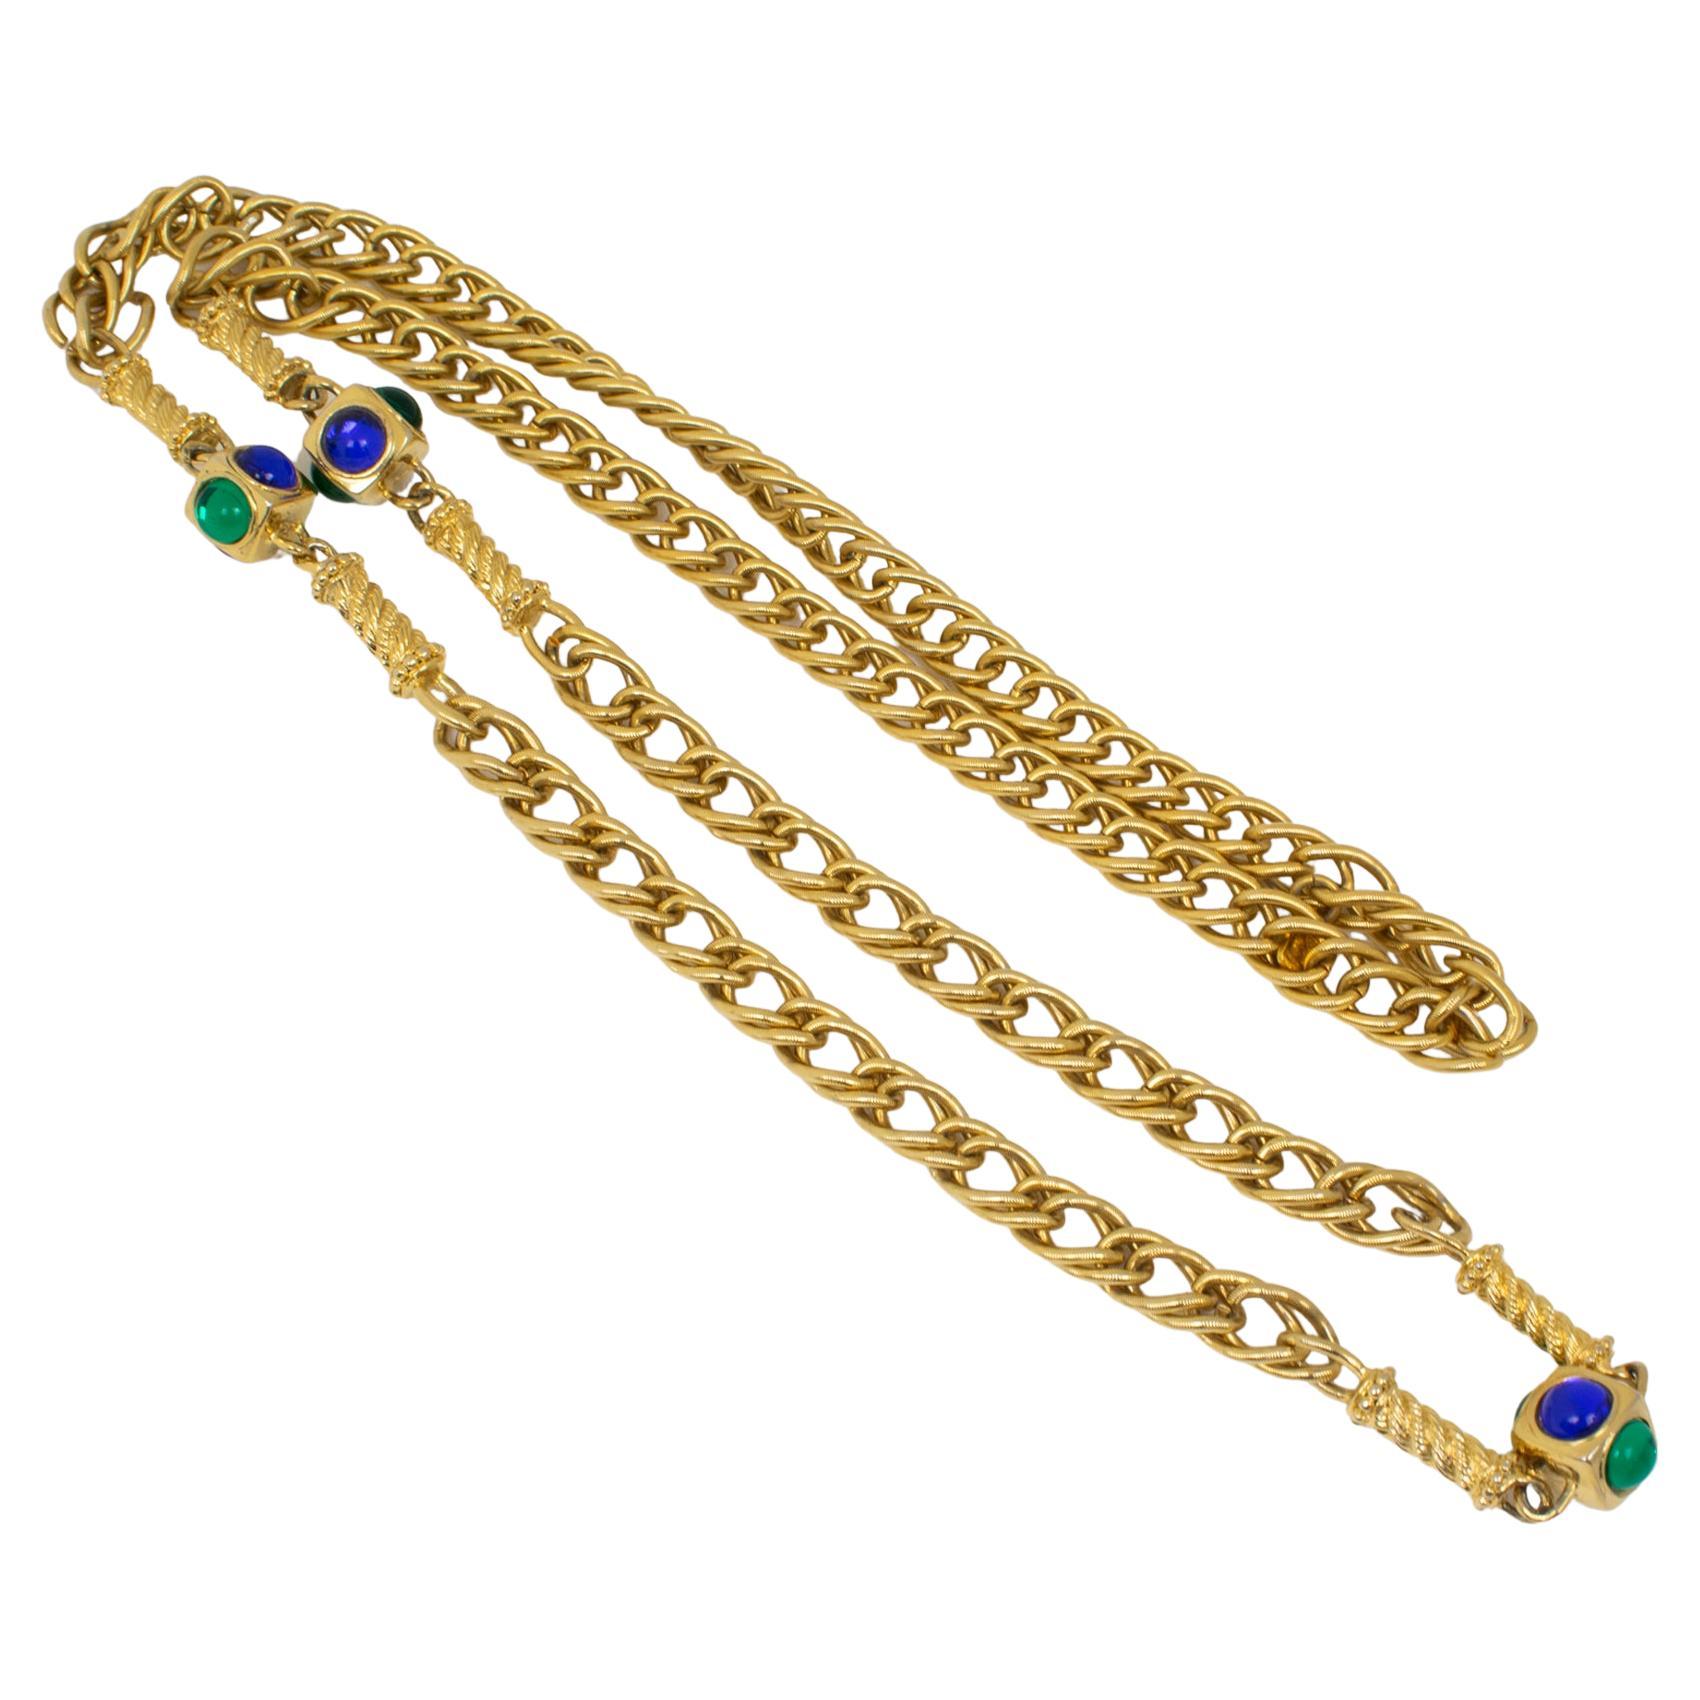 Ungaro Paris Gilt Metal Long Necklace with Blue and Green Resin Cabochons For Sale